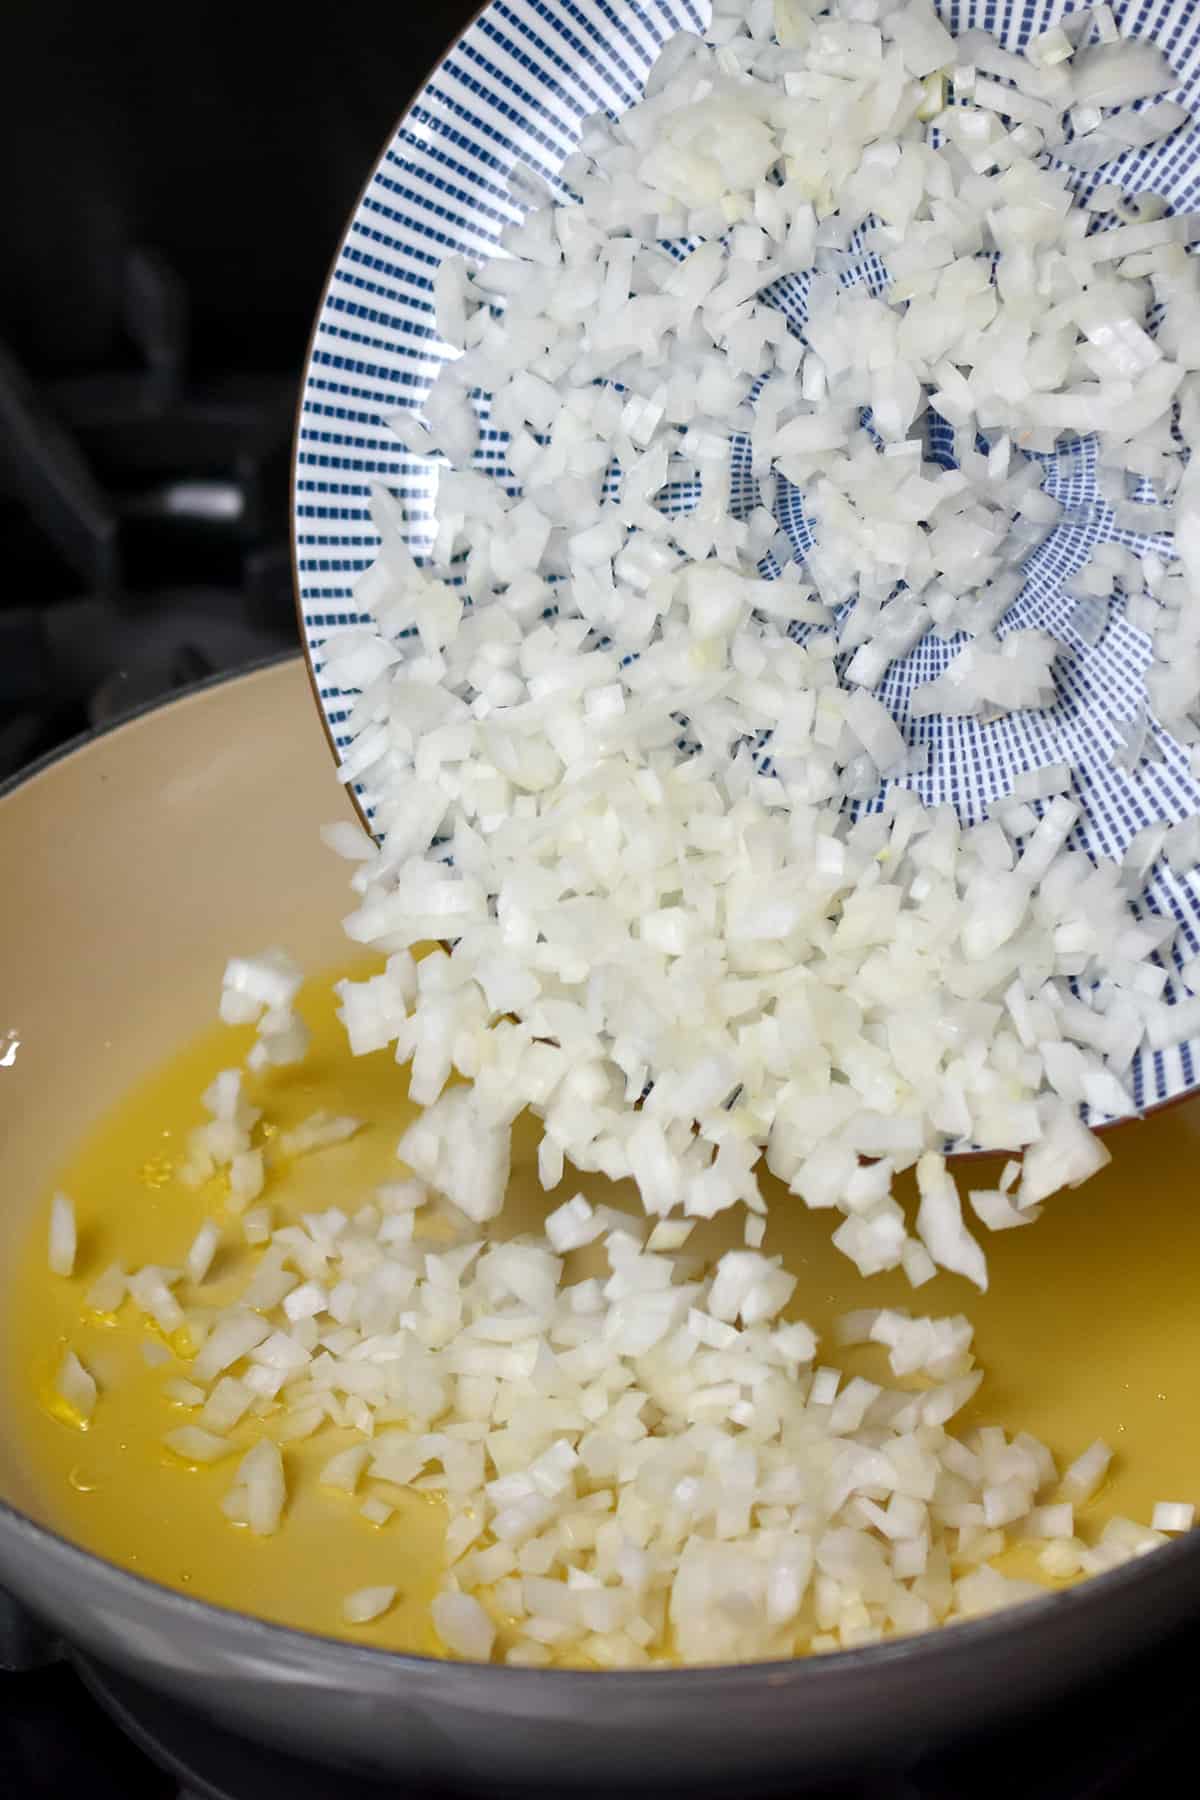 Adding chopping onions to a skillet filled with some hot oil.